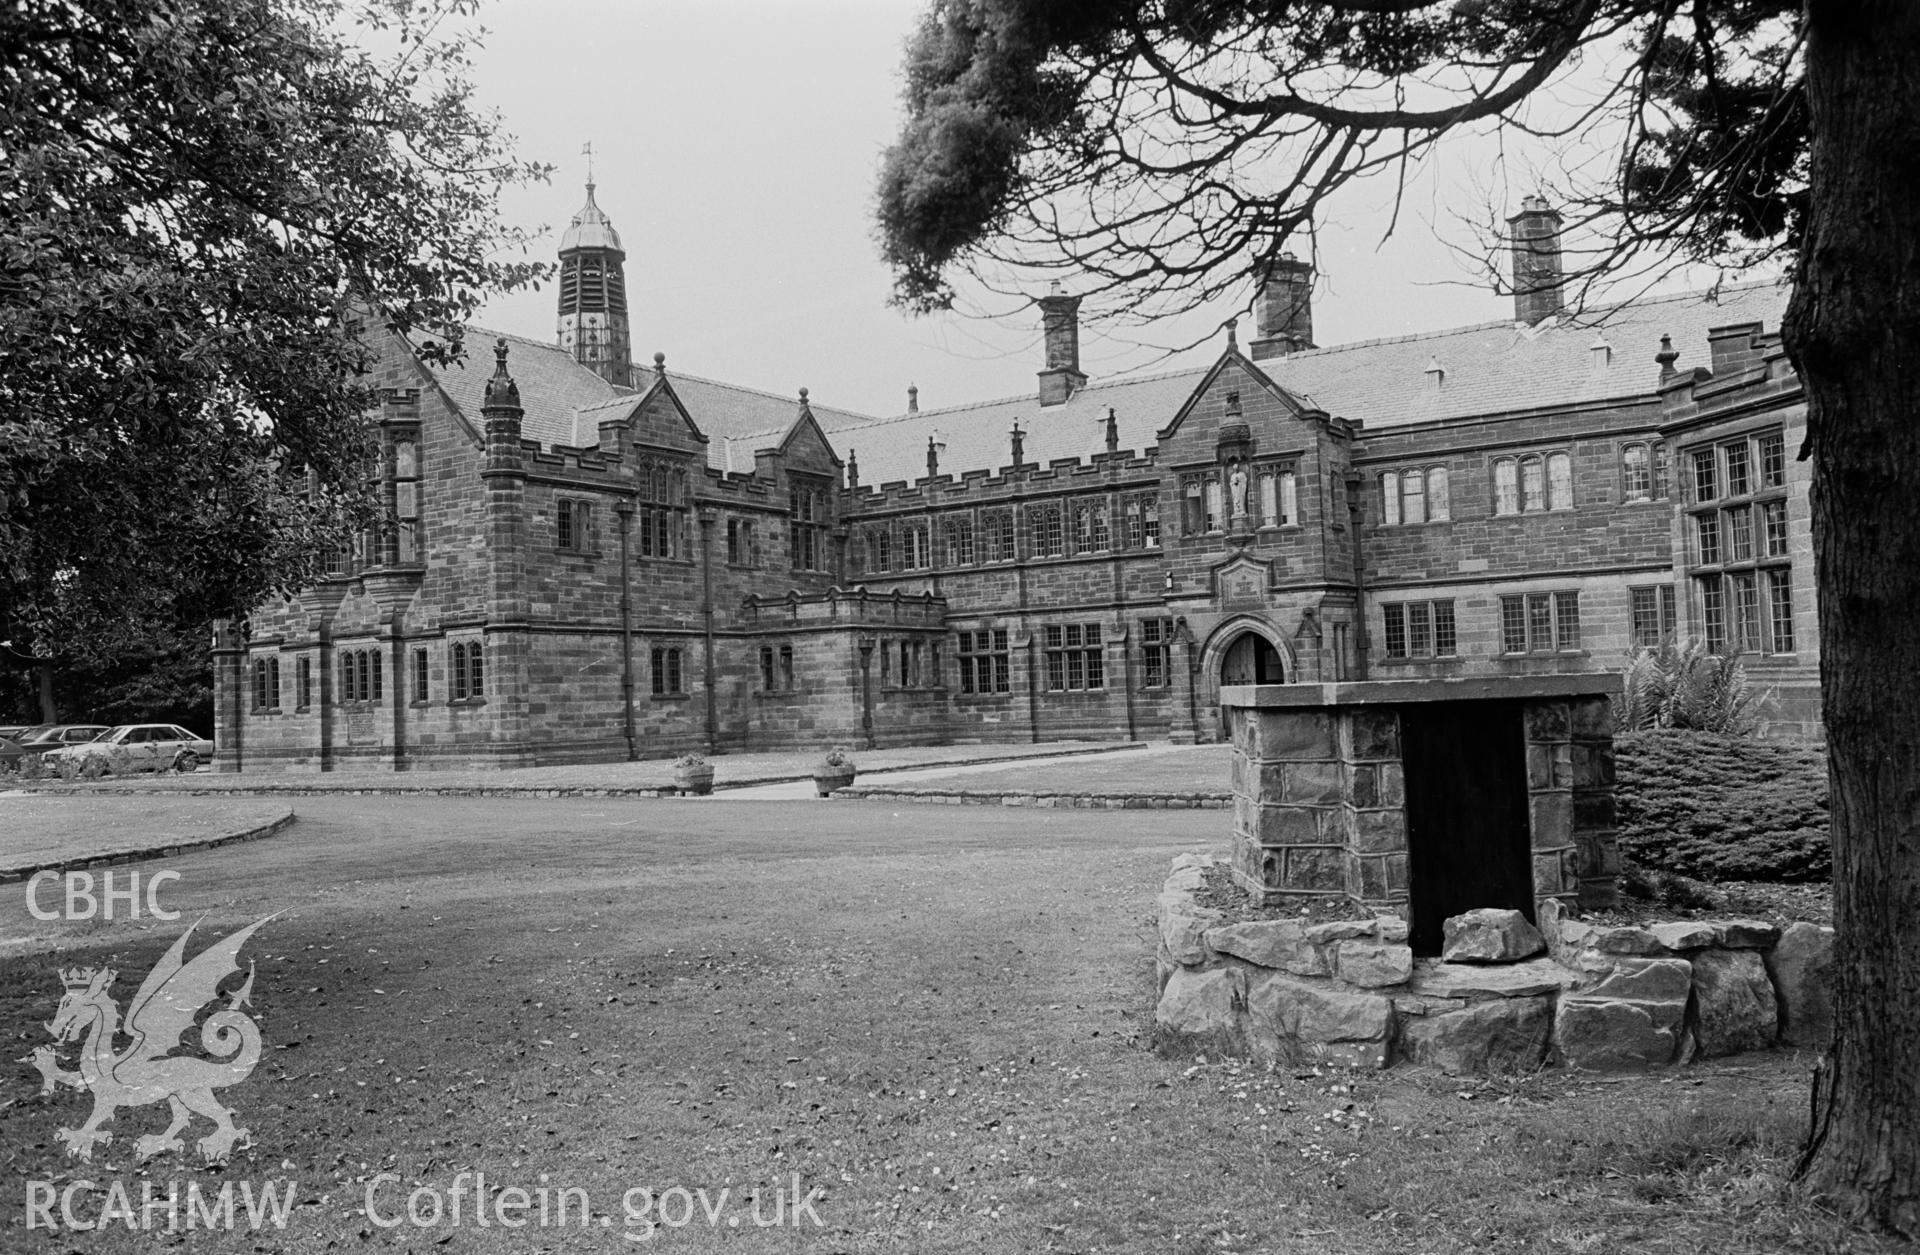 View of exterior of St Deiniol's library, Hawarden